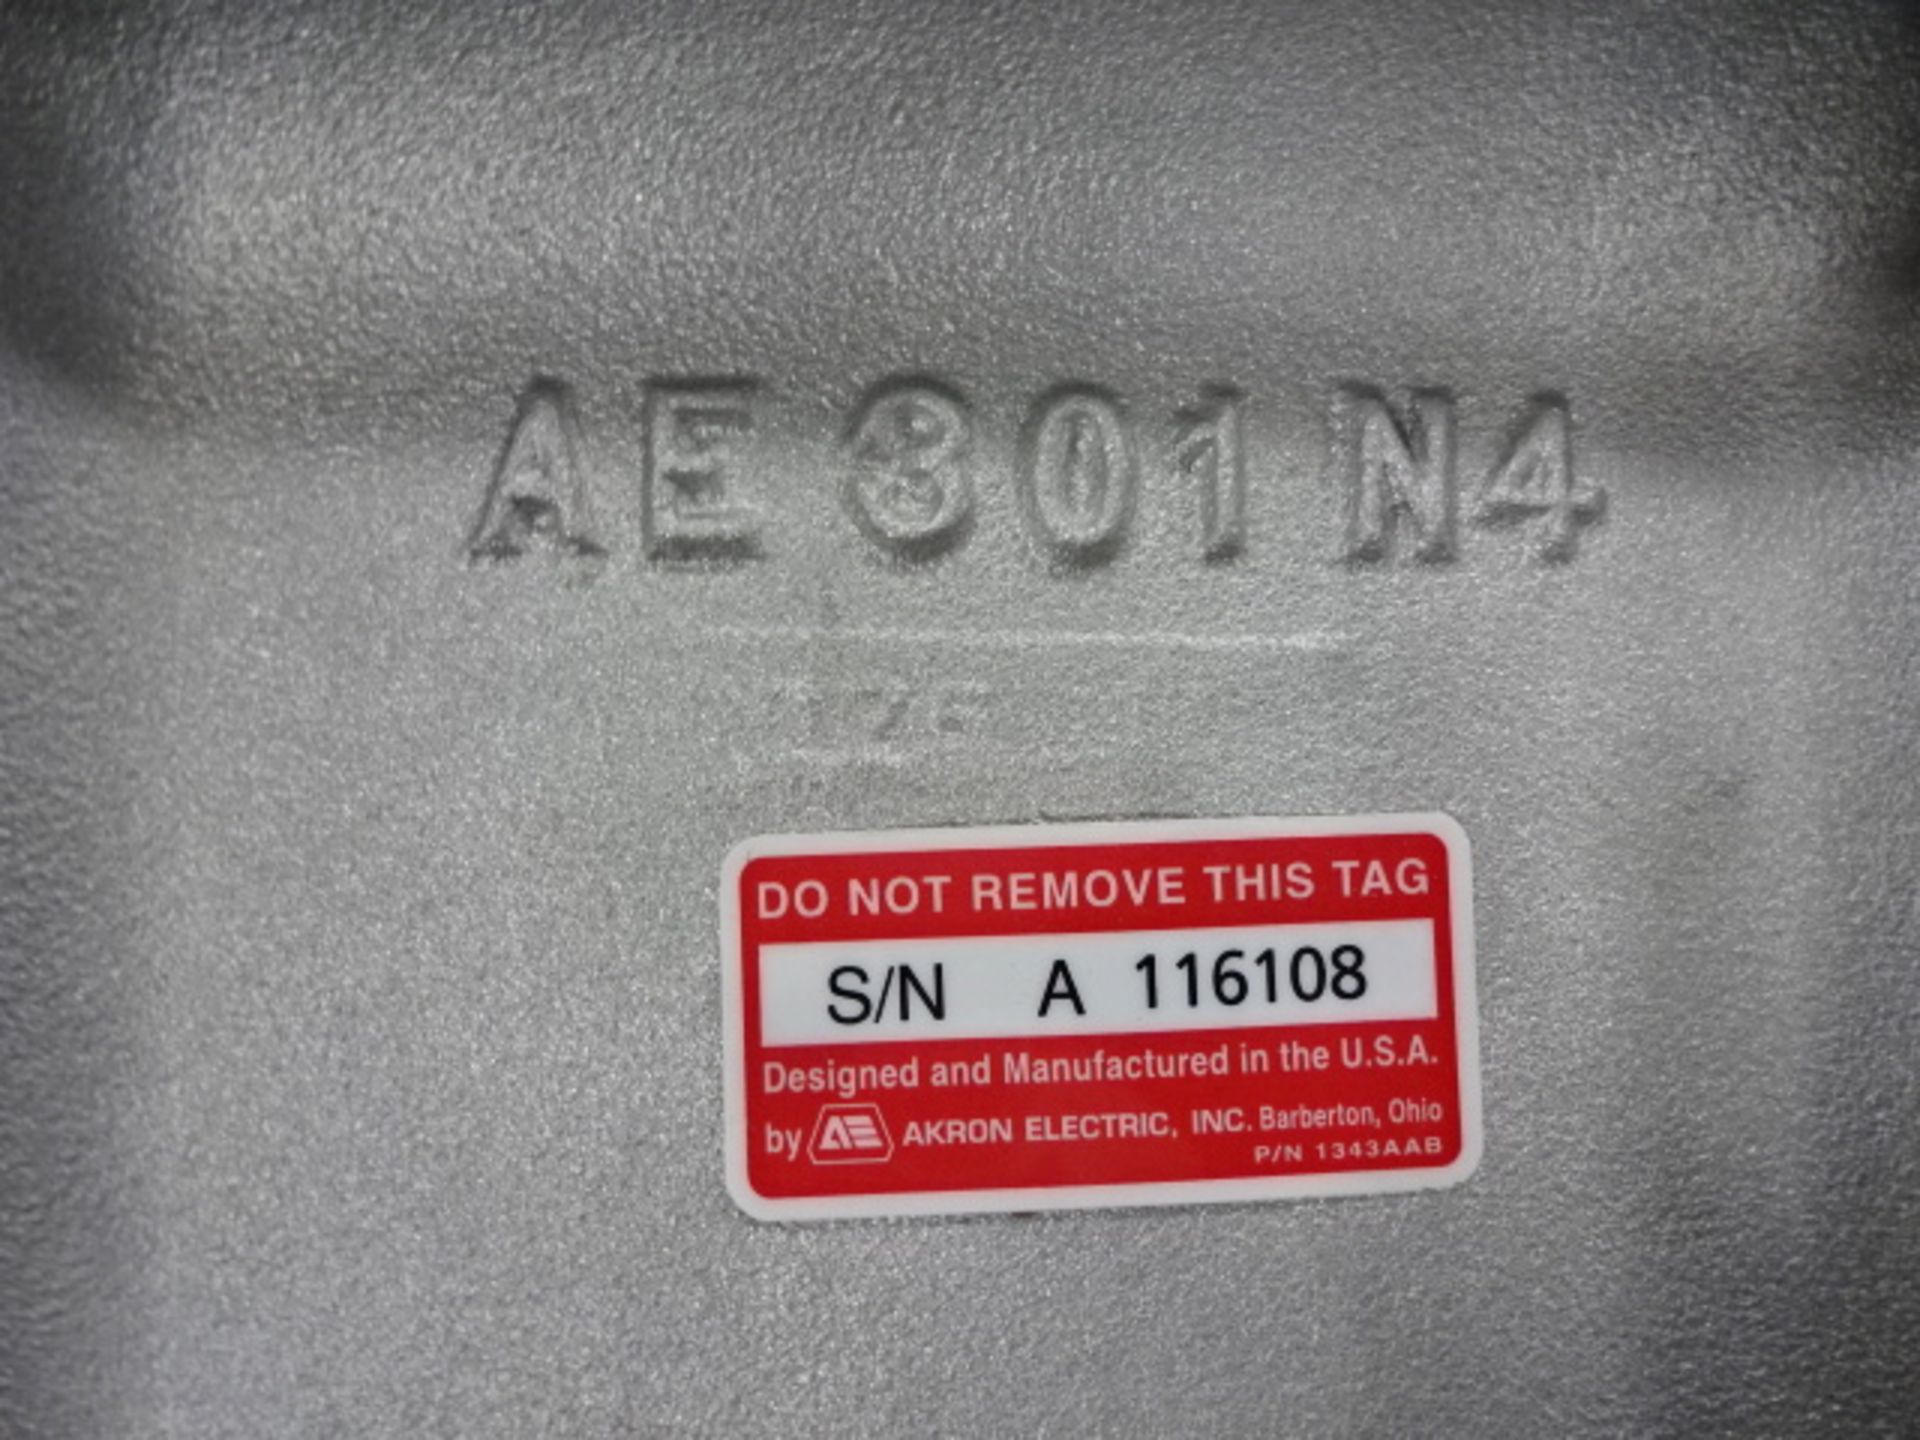 Akron Electric fire and explosion resistant electric box - Image 4 of 5